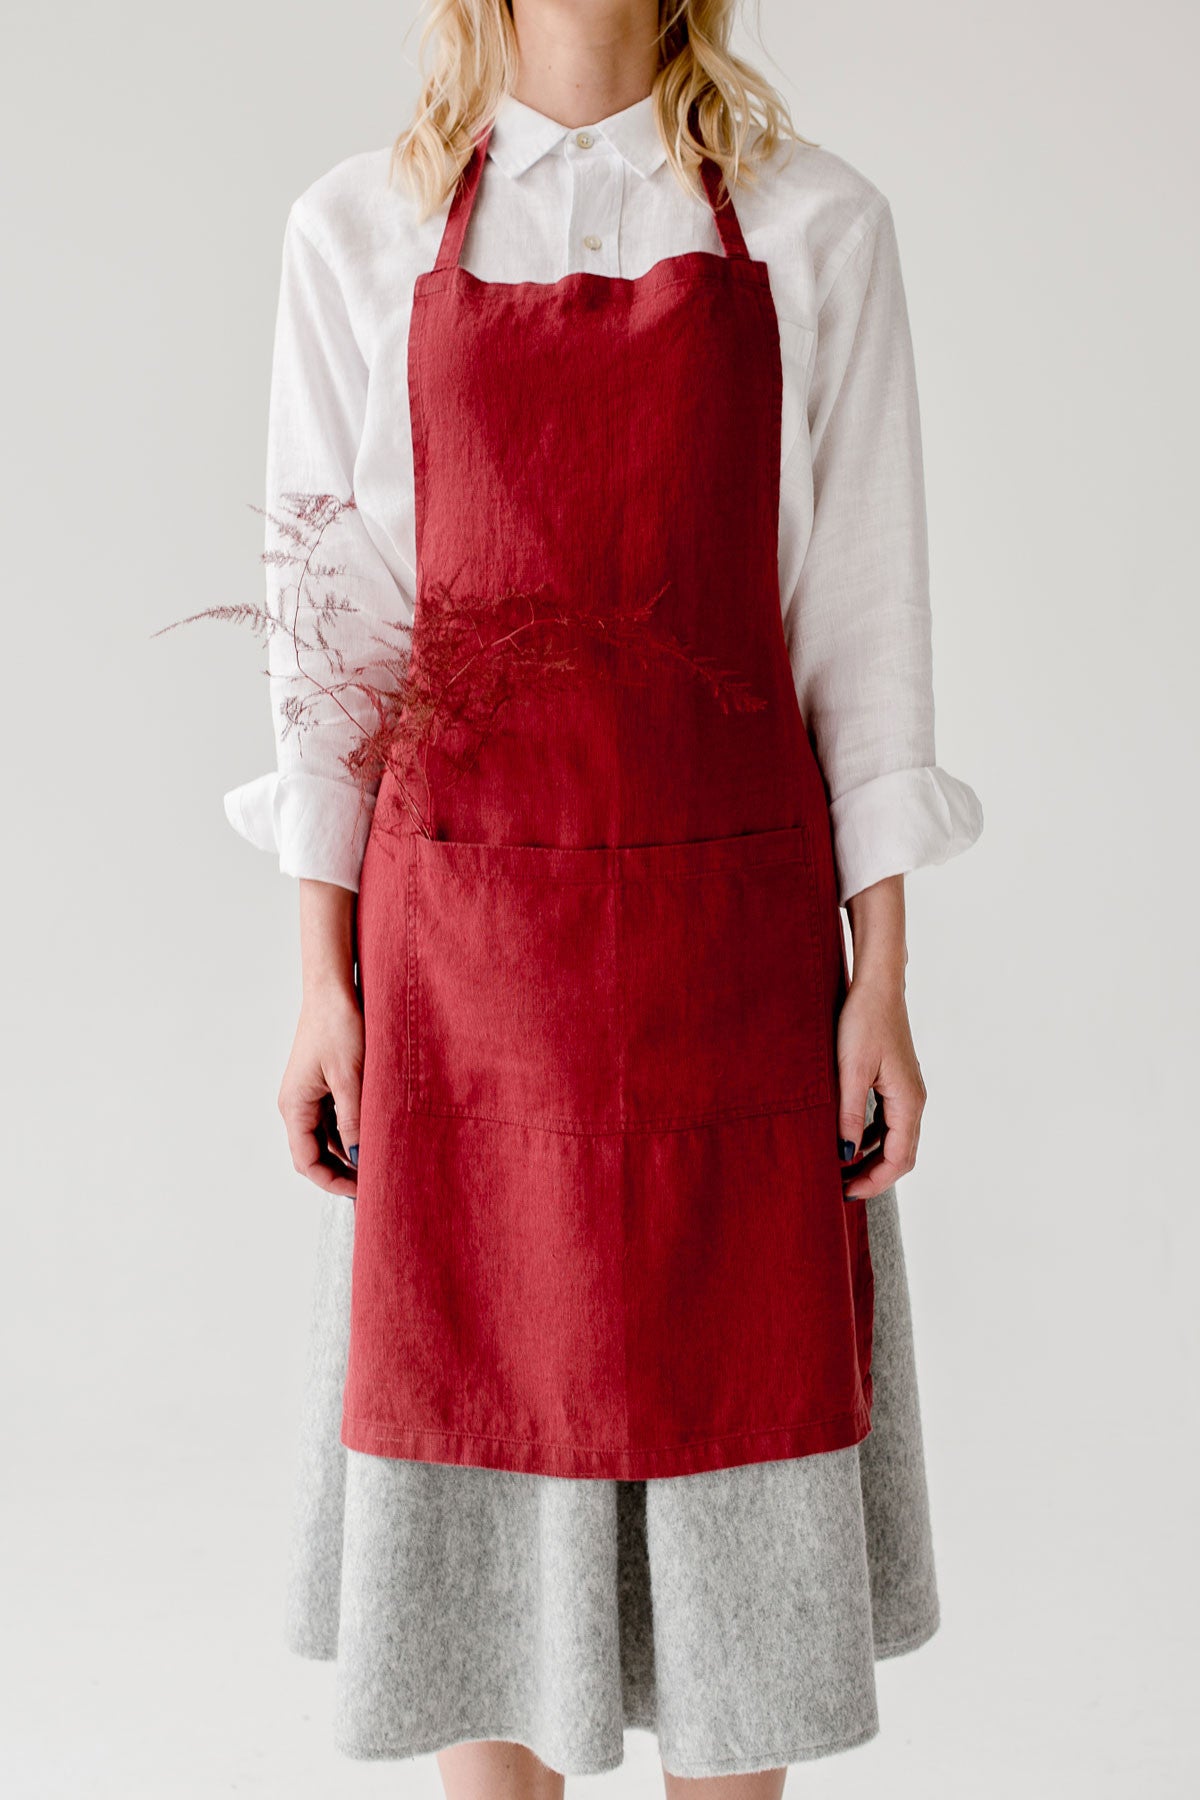 DAILY APRON red pear